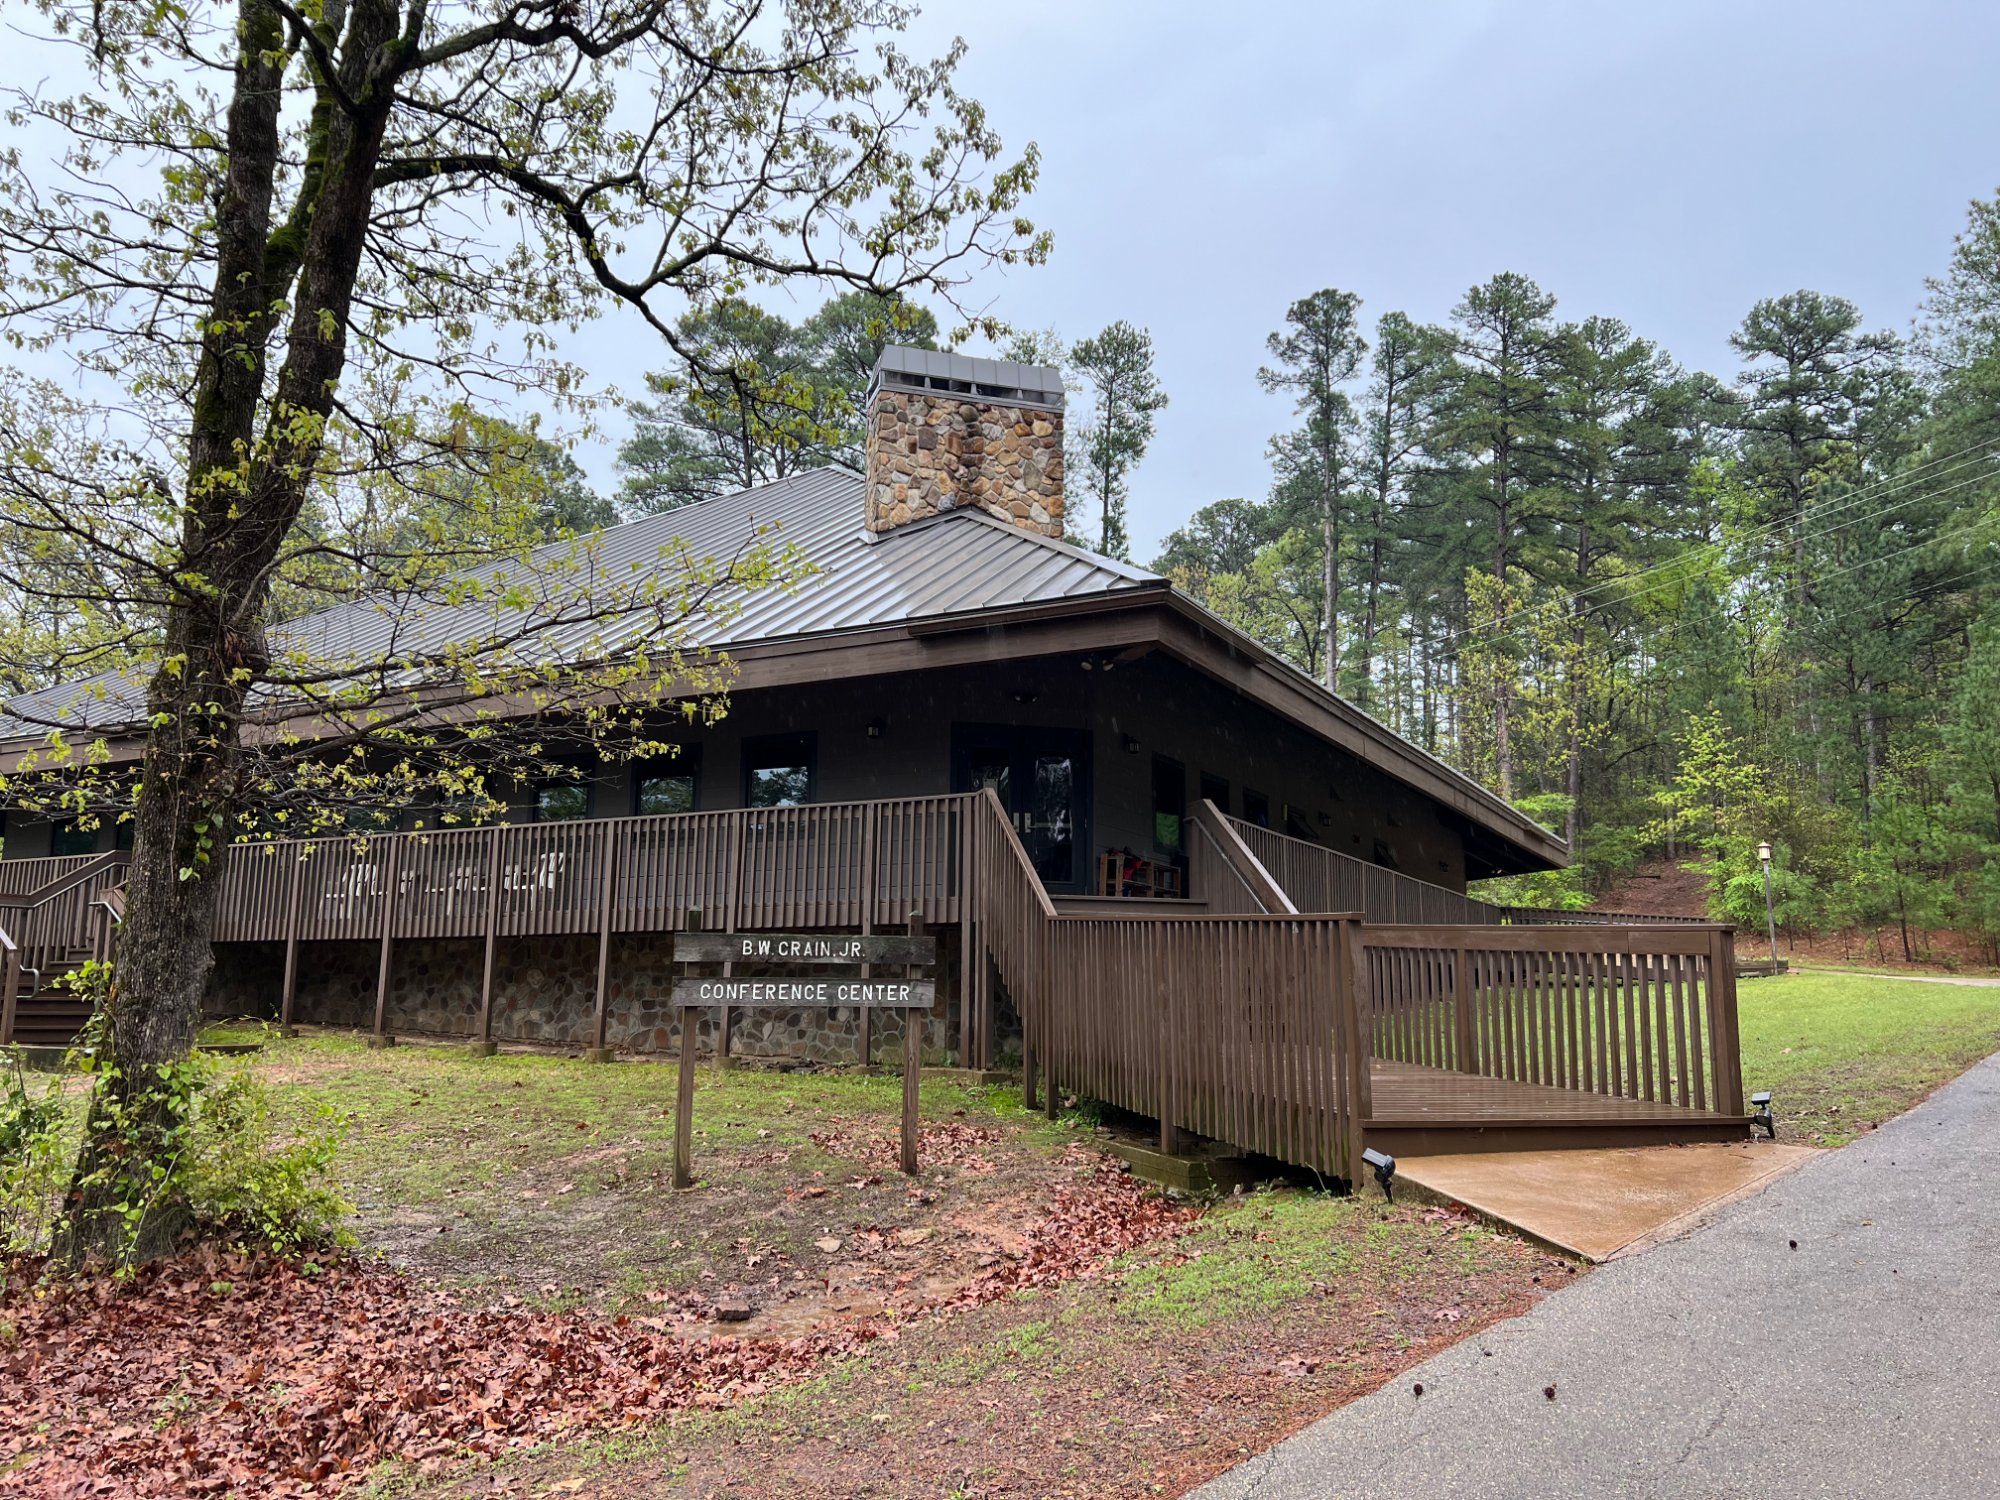 Gilmont’s humble beginnings of rugged camping had grown over time and springboarded into a modern Camp and Conference Center with the addition of the Crain Center.